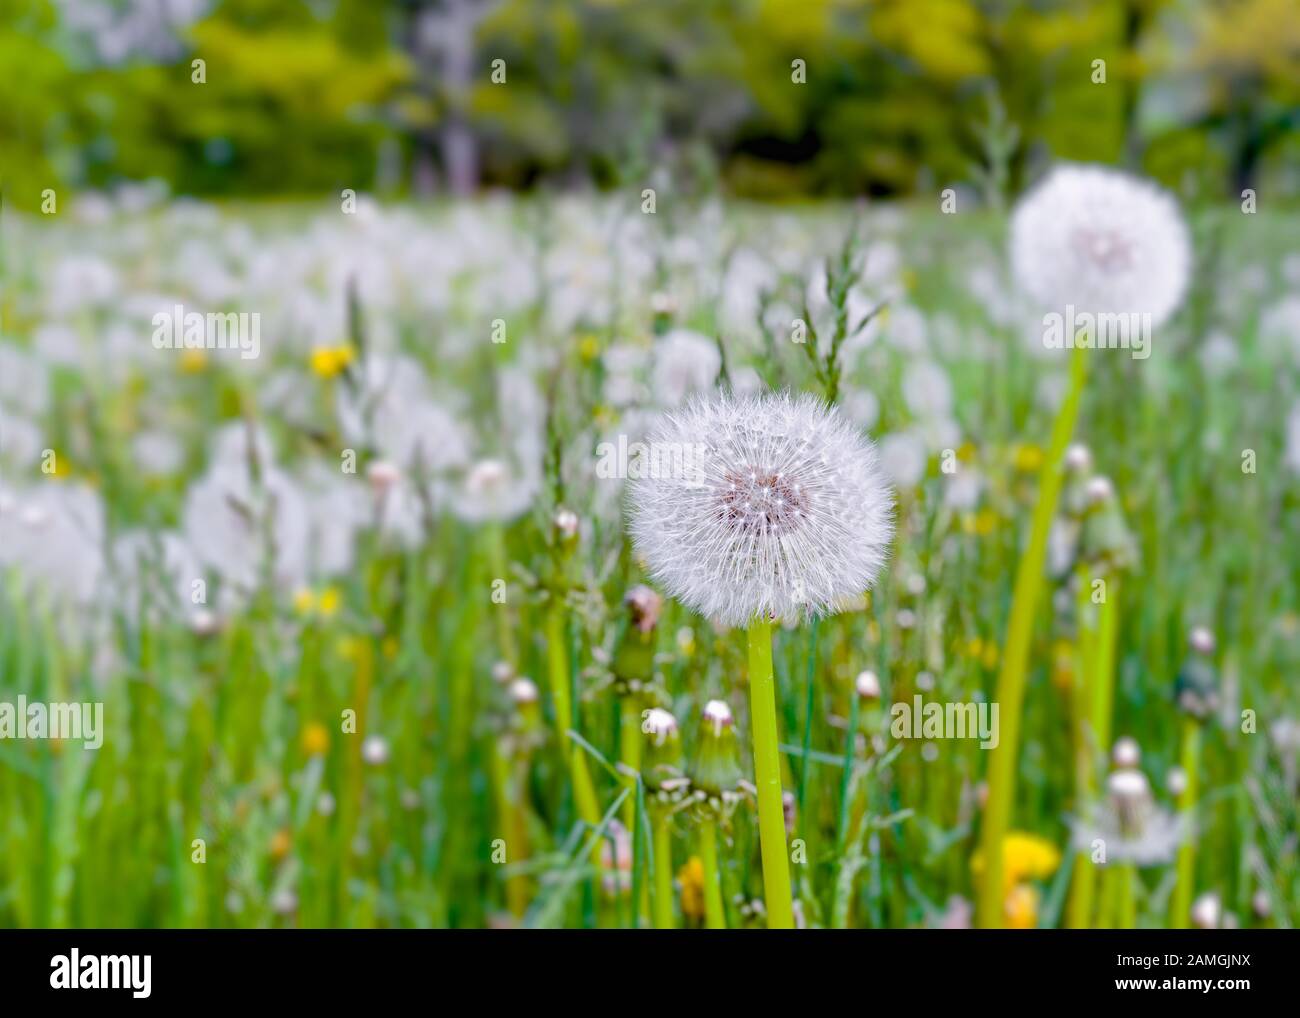 Dandelions gone to seed in a springtime lawn. Stock Photo